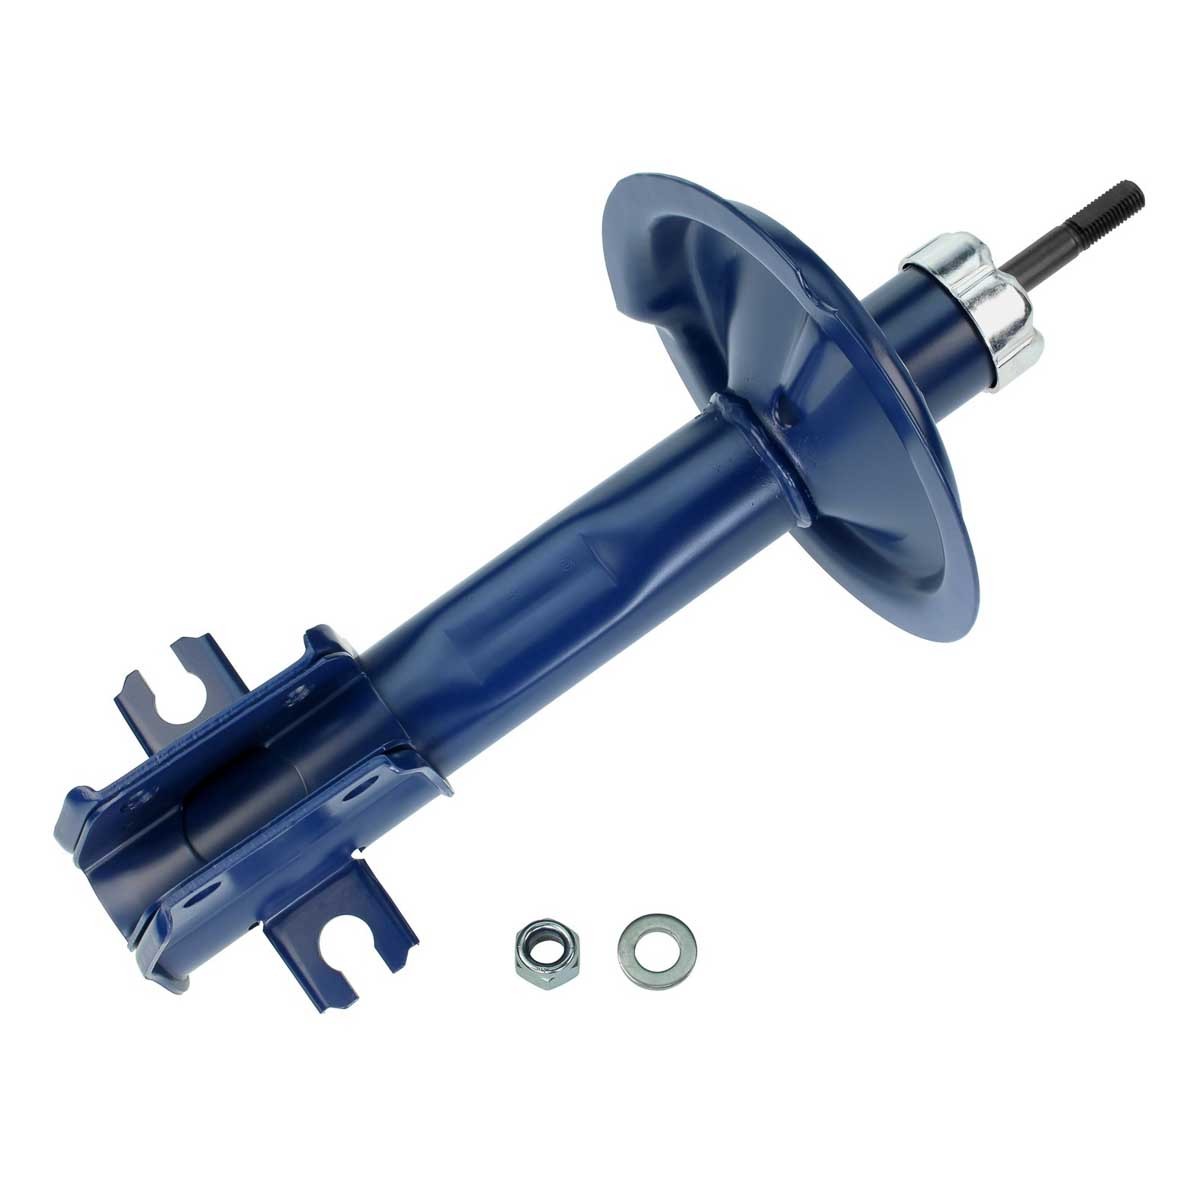 226 613 0011 MEYLE Shock absorbers FIAT Front Axle, Oil Pressure, Twin-Tube, Suspension Strut, Top pin, ORIGINAL Quality